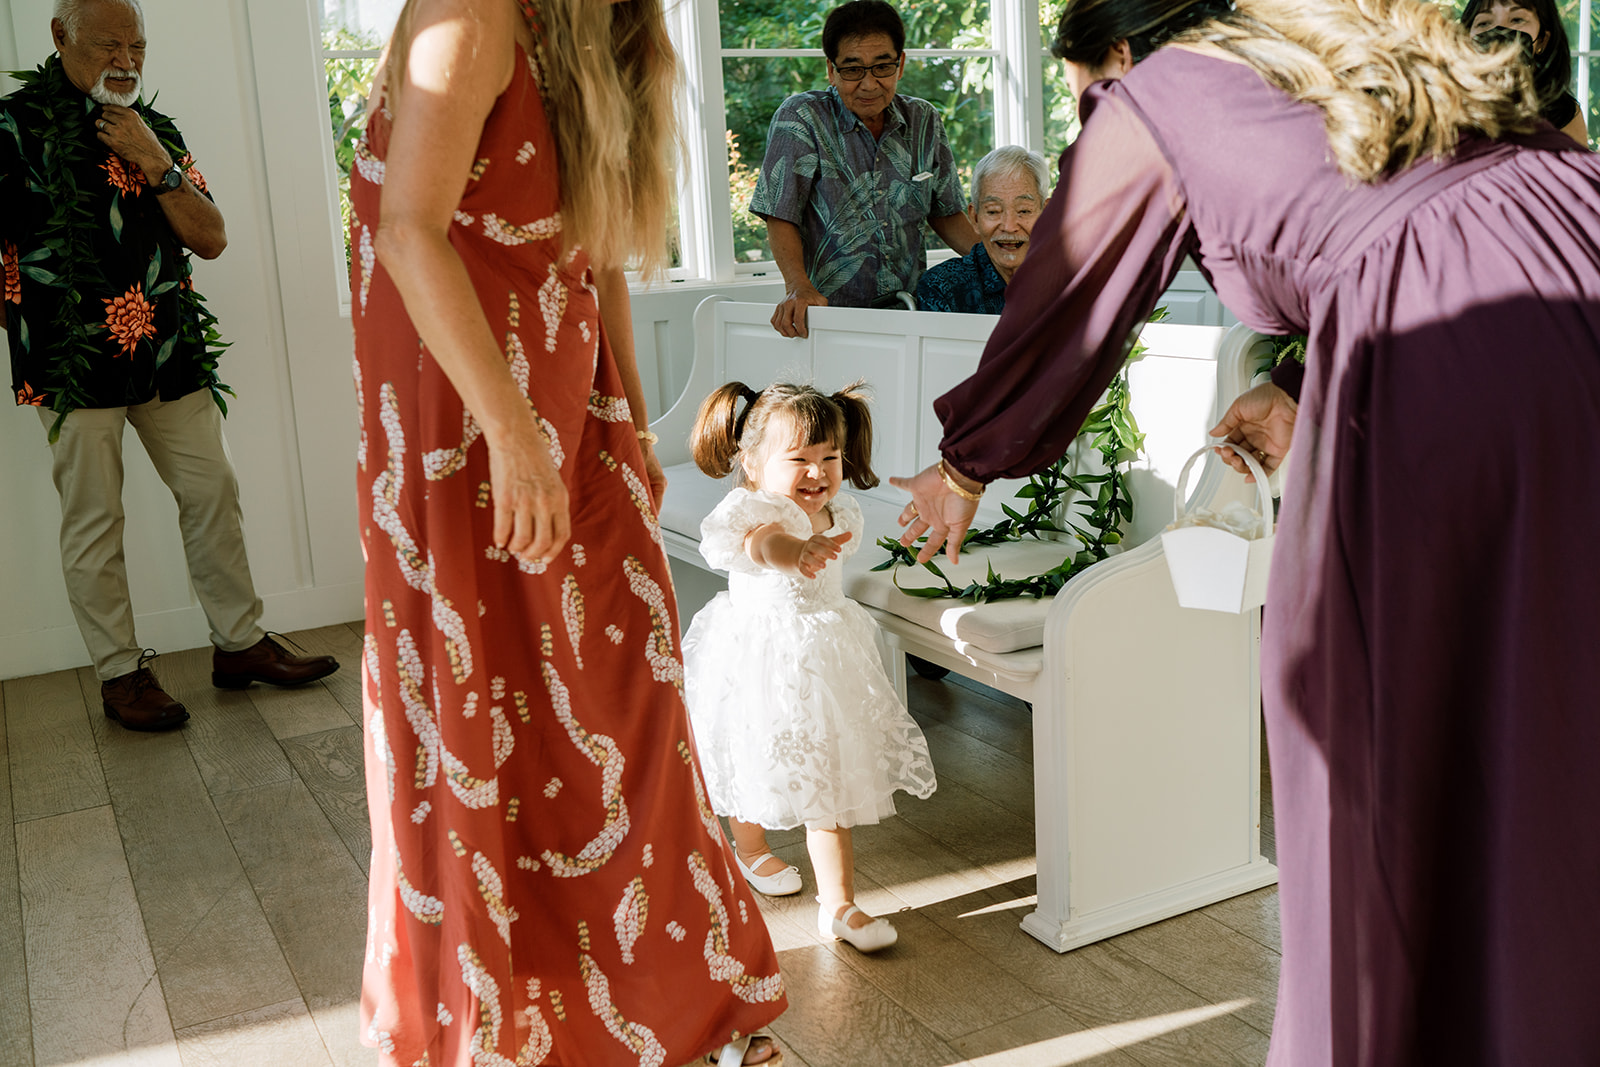 A little girl is being handed a flower by a woman in a purple dress during a wedding in The Four Seasons Oahu